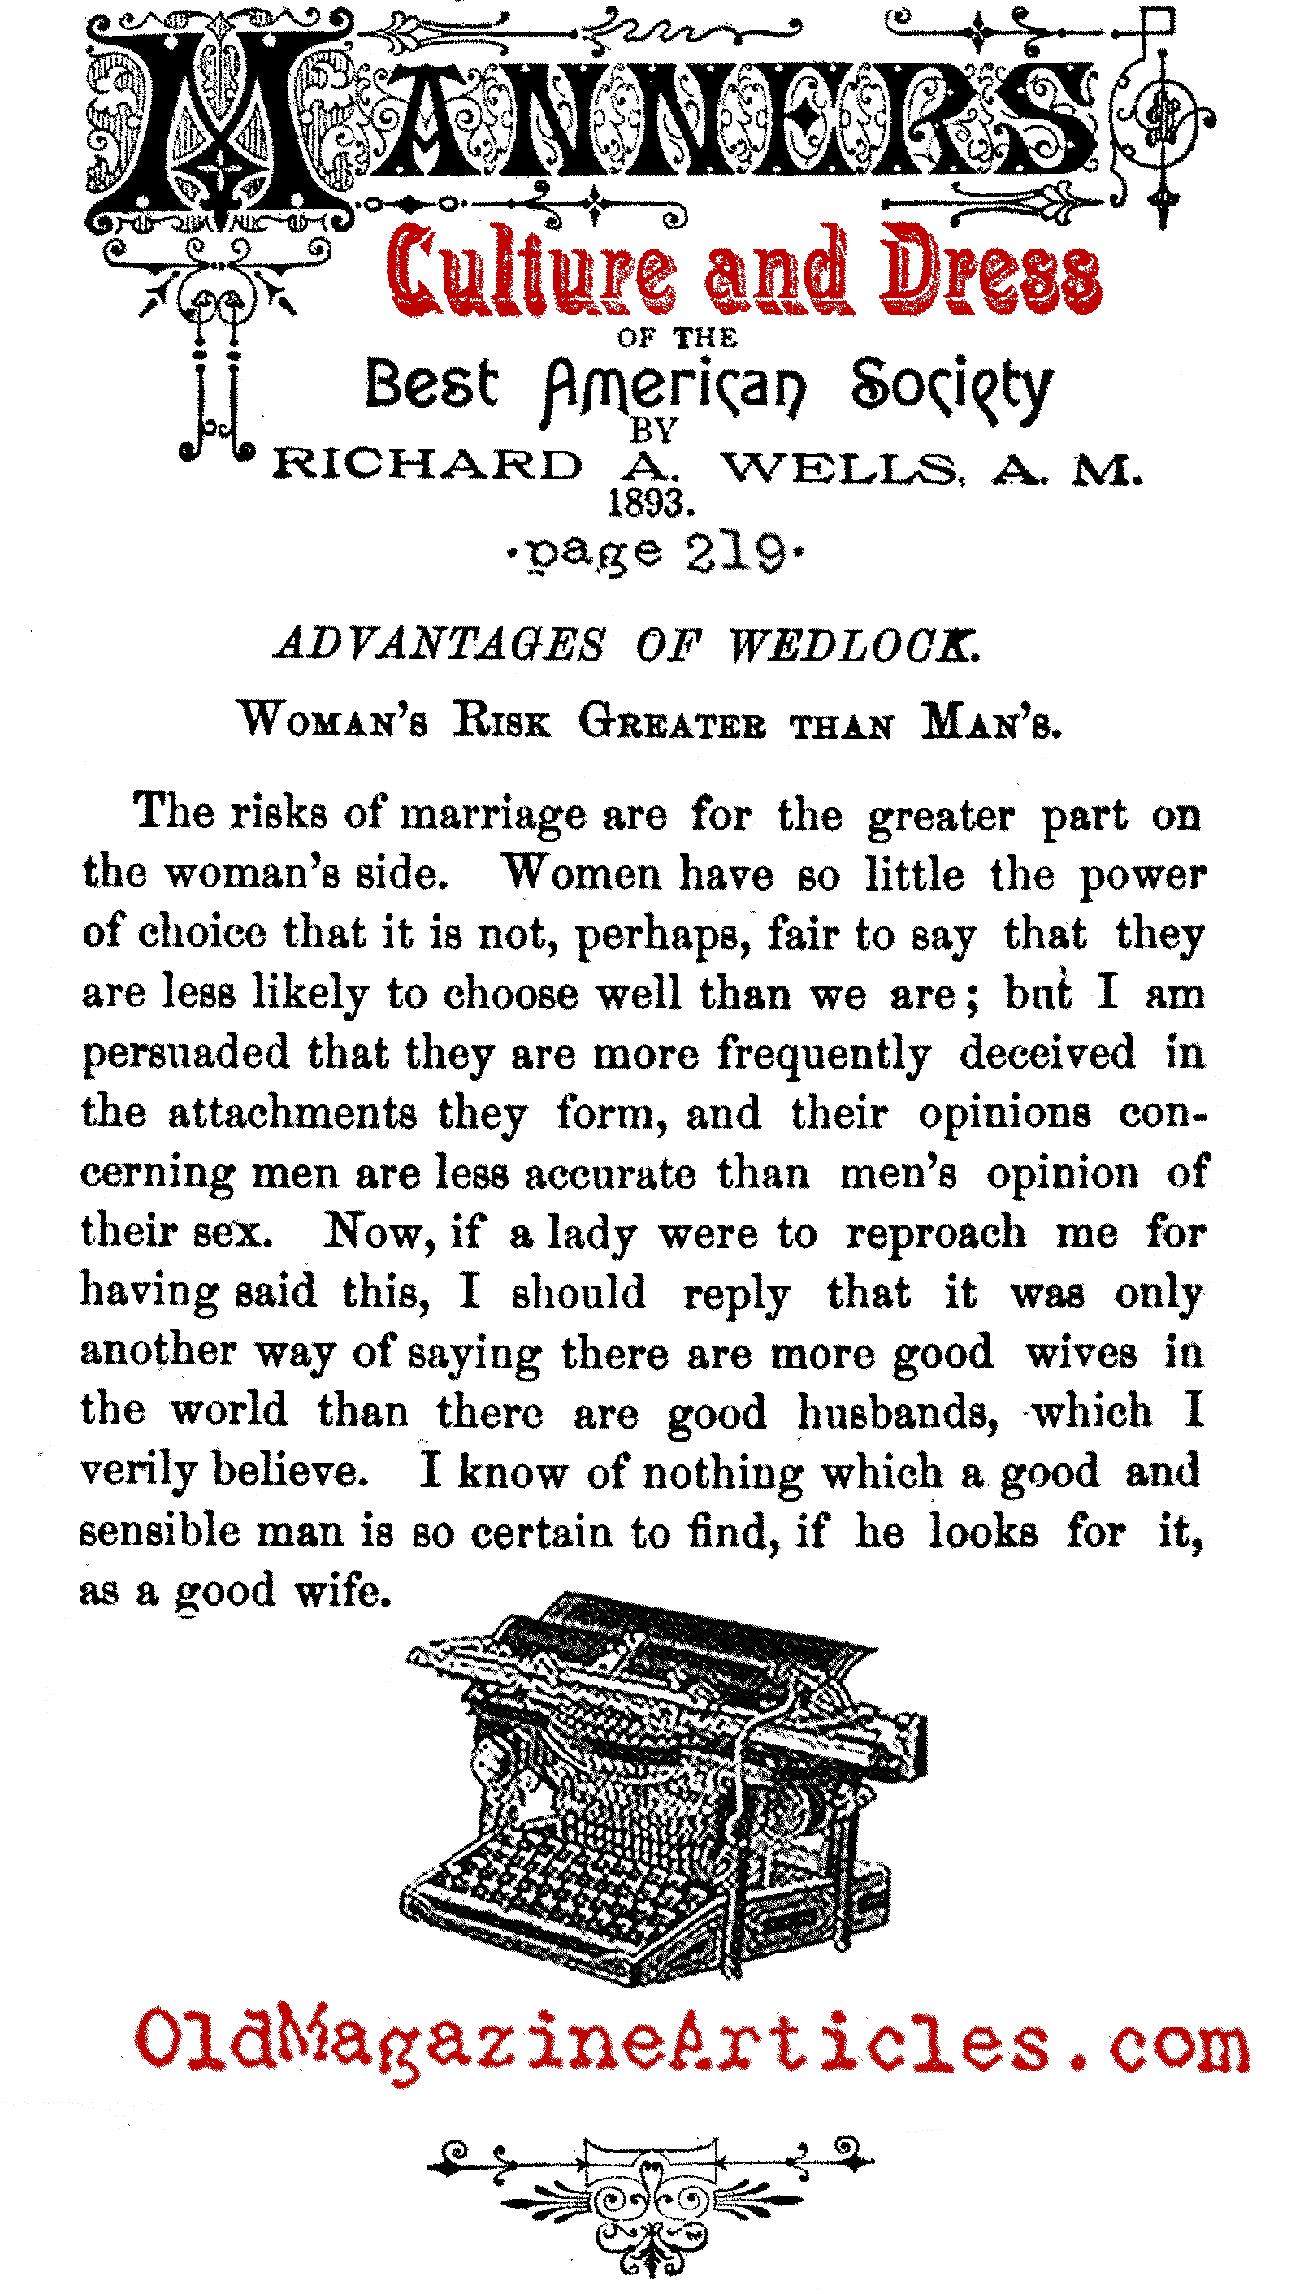 Men Are Cads (Manners, Culture and Dress, 1893)